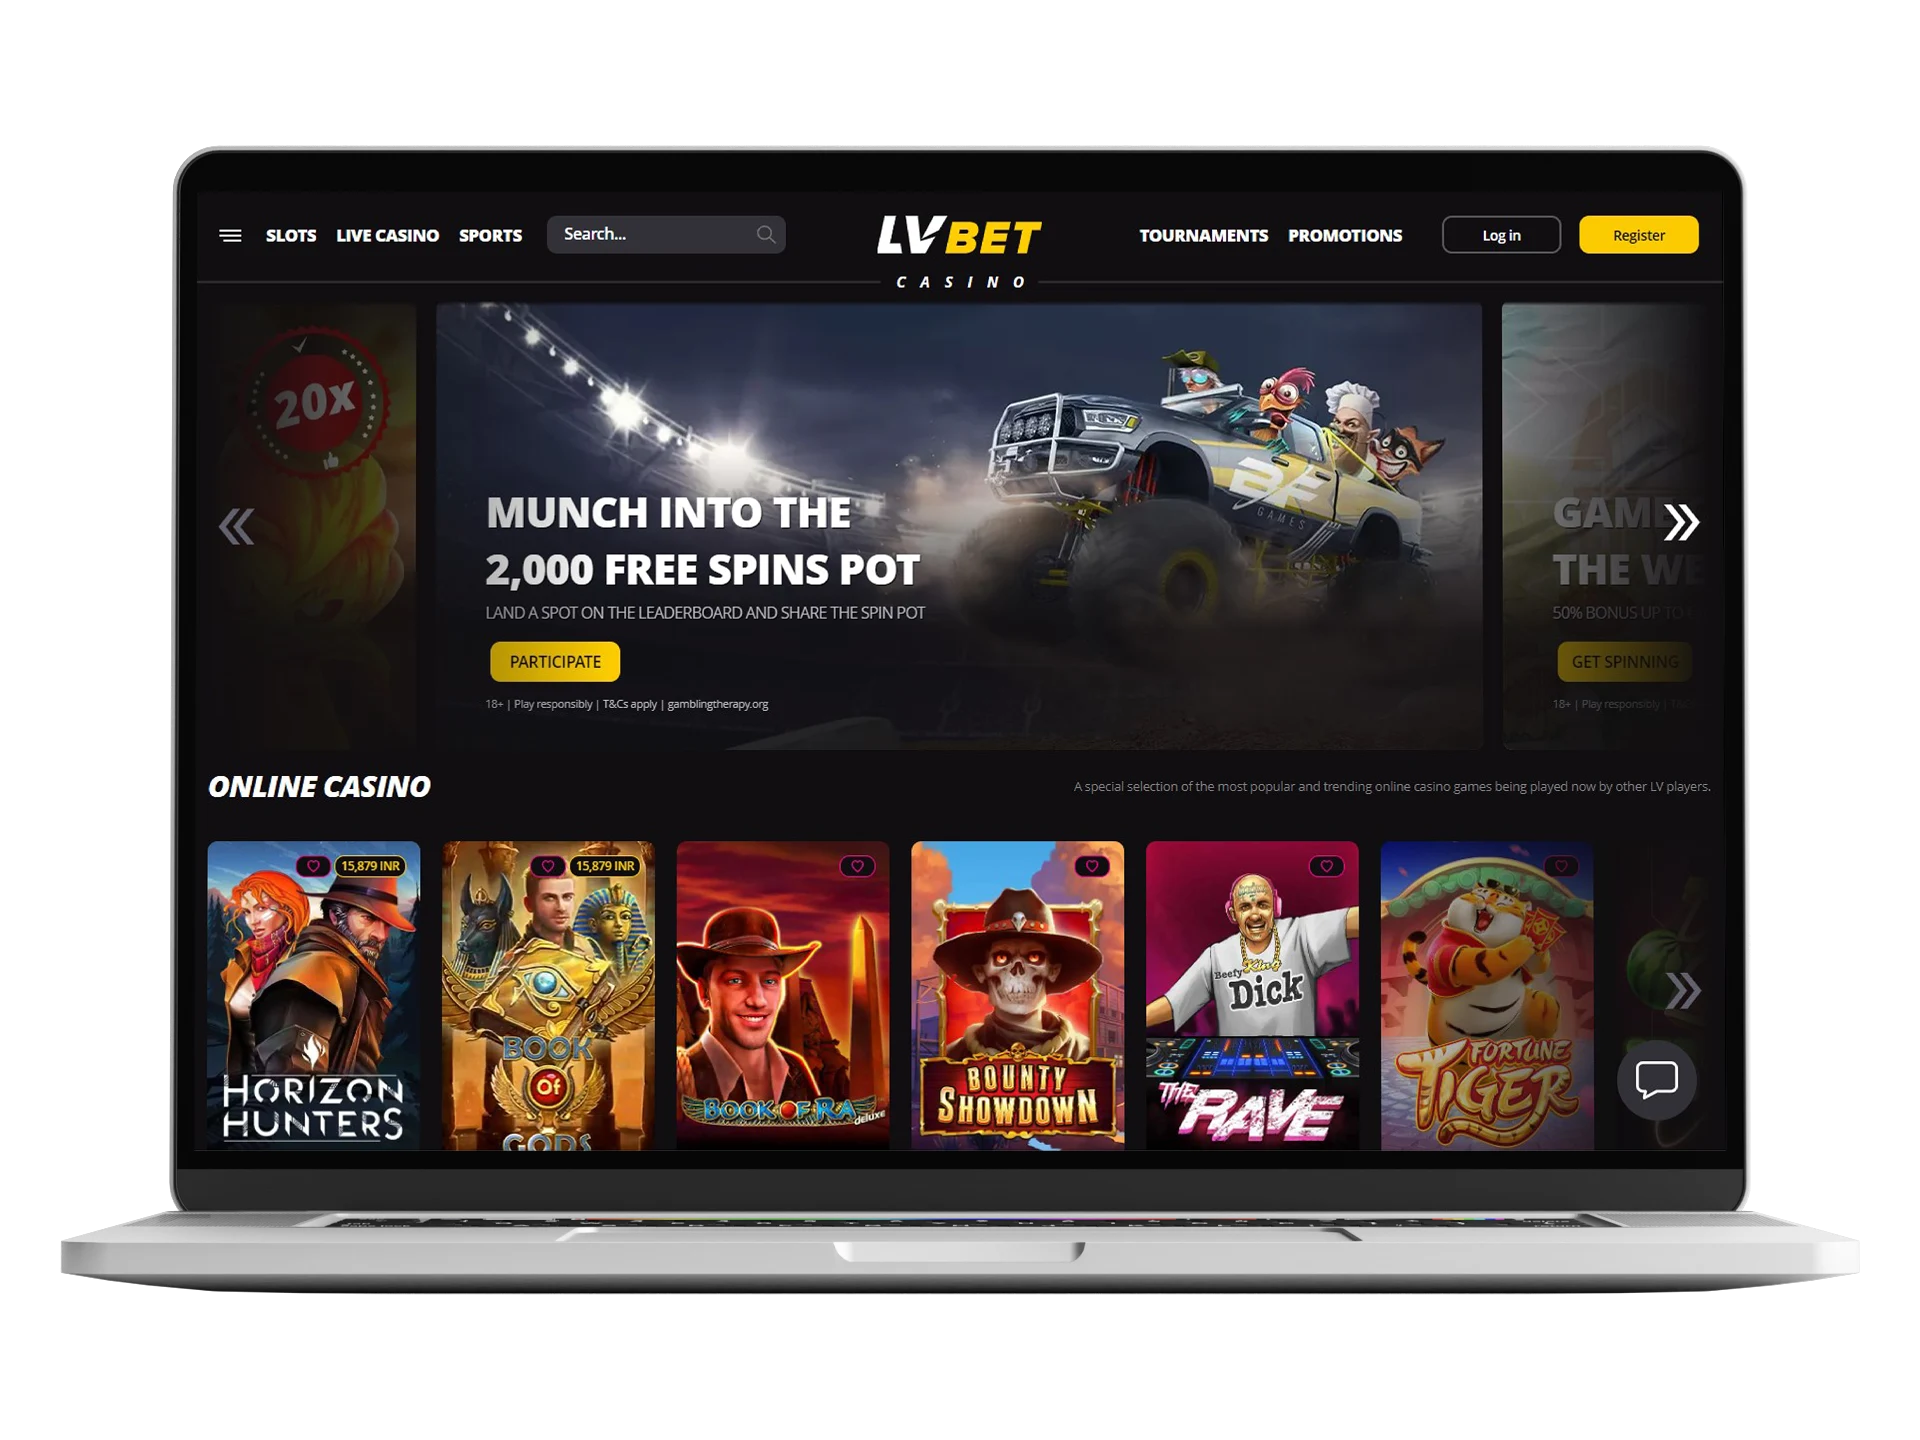 LVbet is a modern bookmaker in India, offering a full range of online and live betting options, as well as thousands of events available every day.